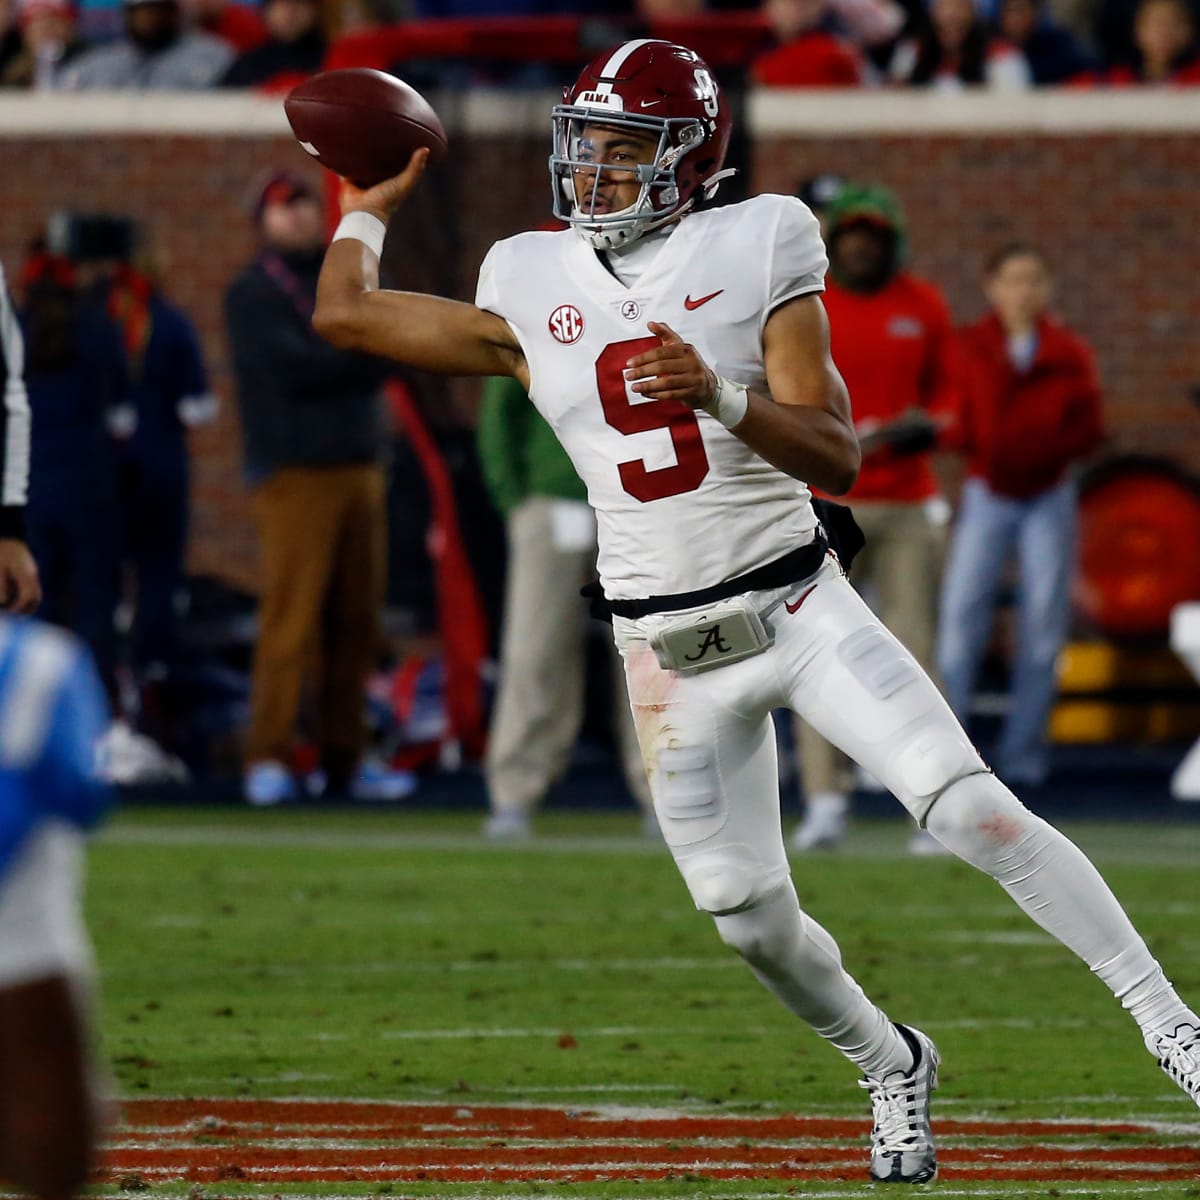 Gamer: Ole Miss loses hard-fought game to Alabama, 30-24 - The